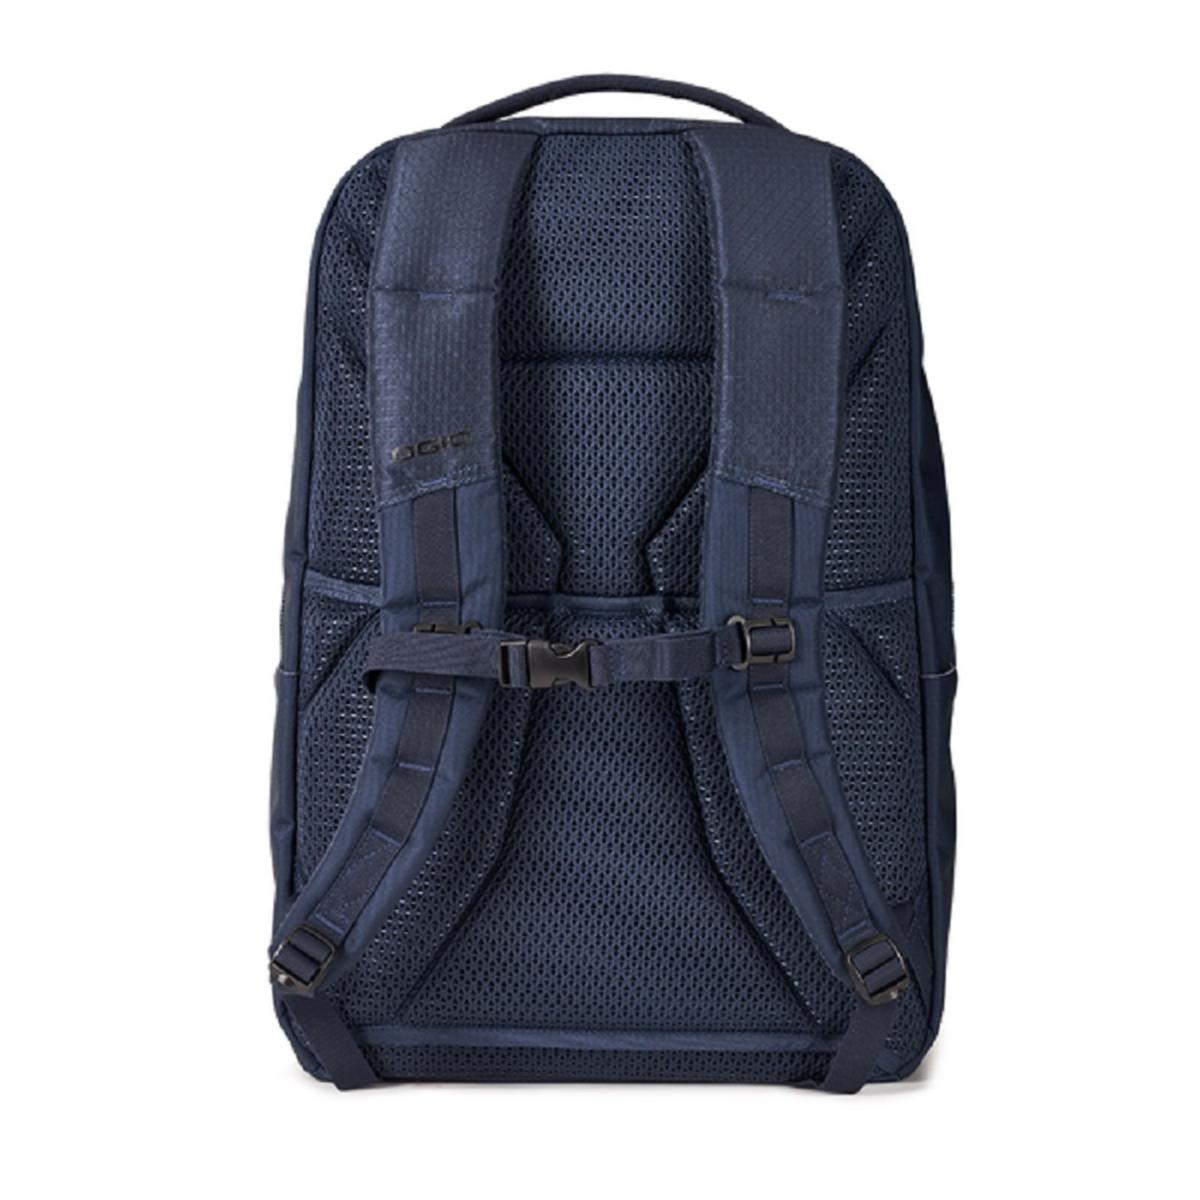 Ogio Axle Pro 22L Backpack